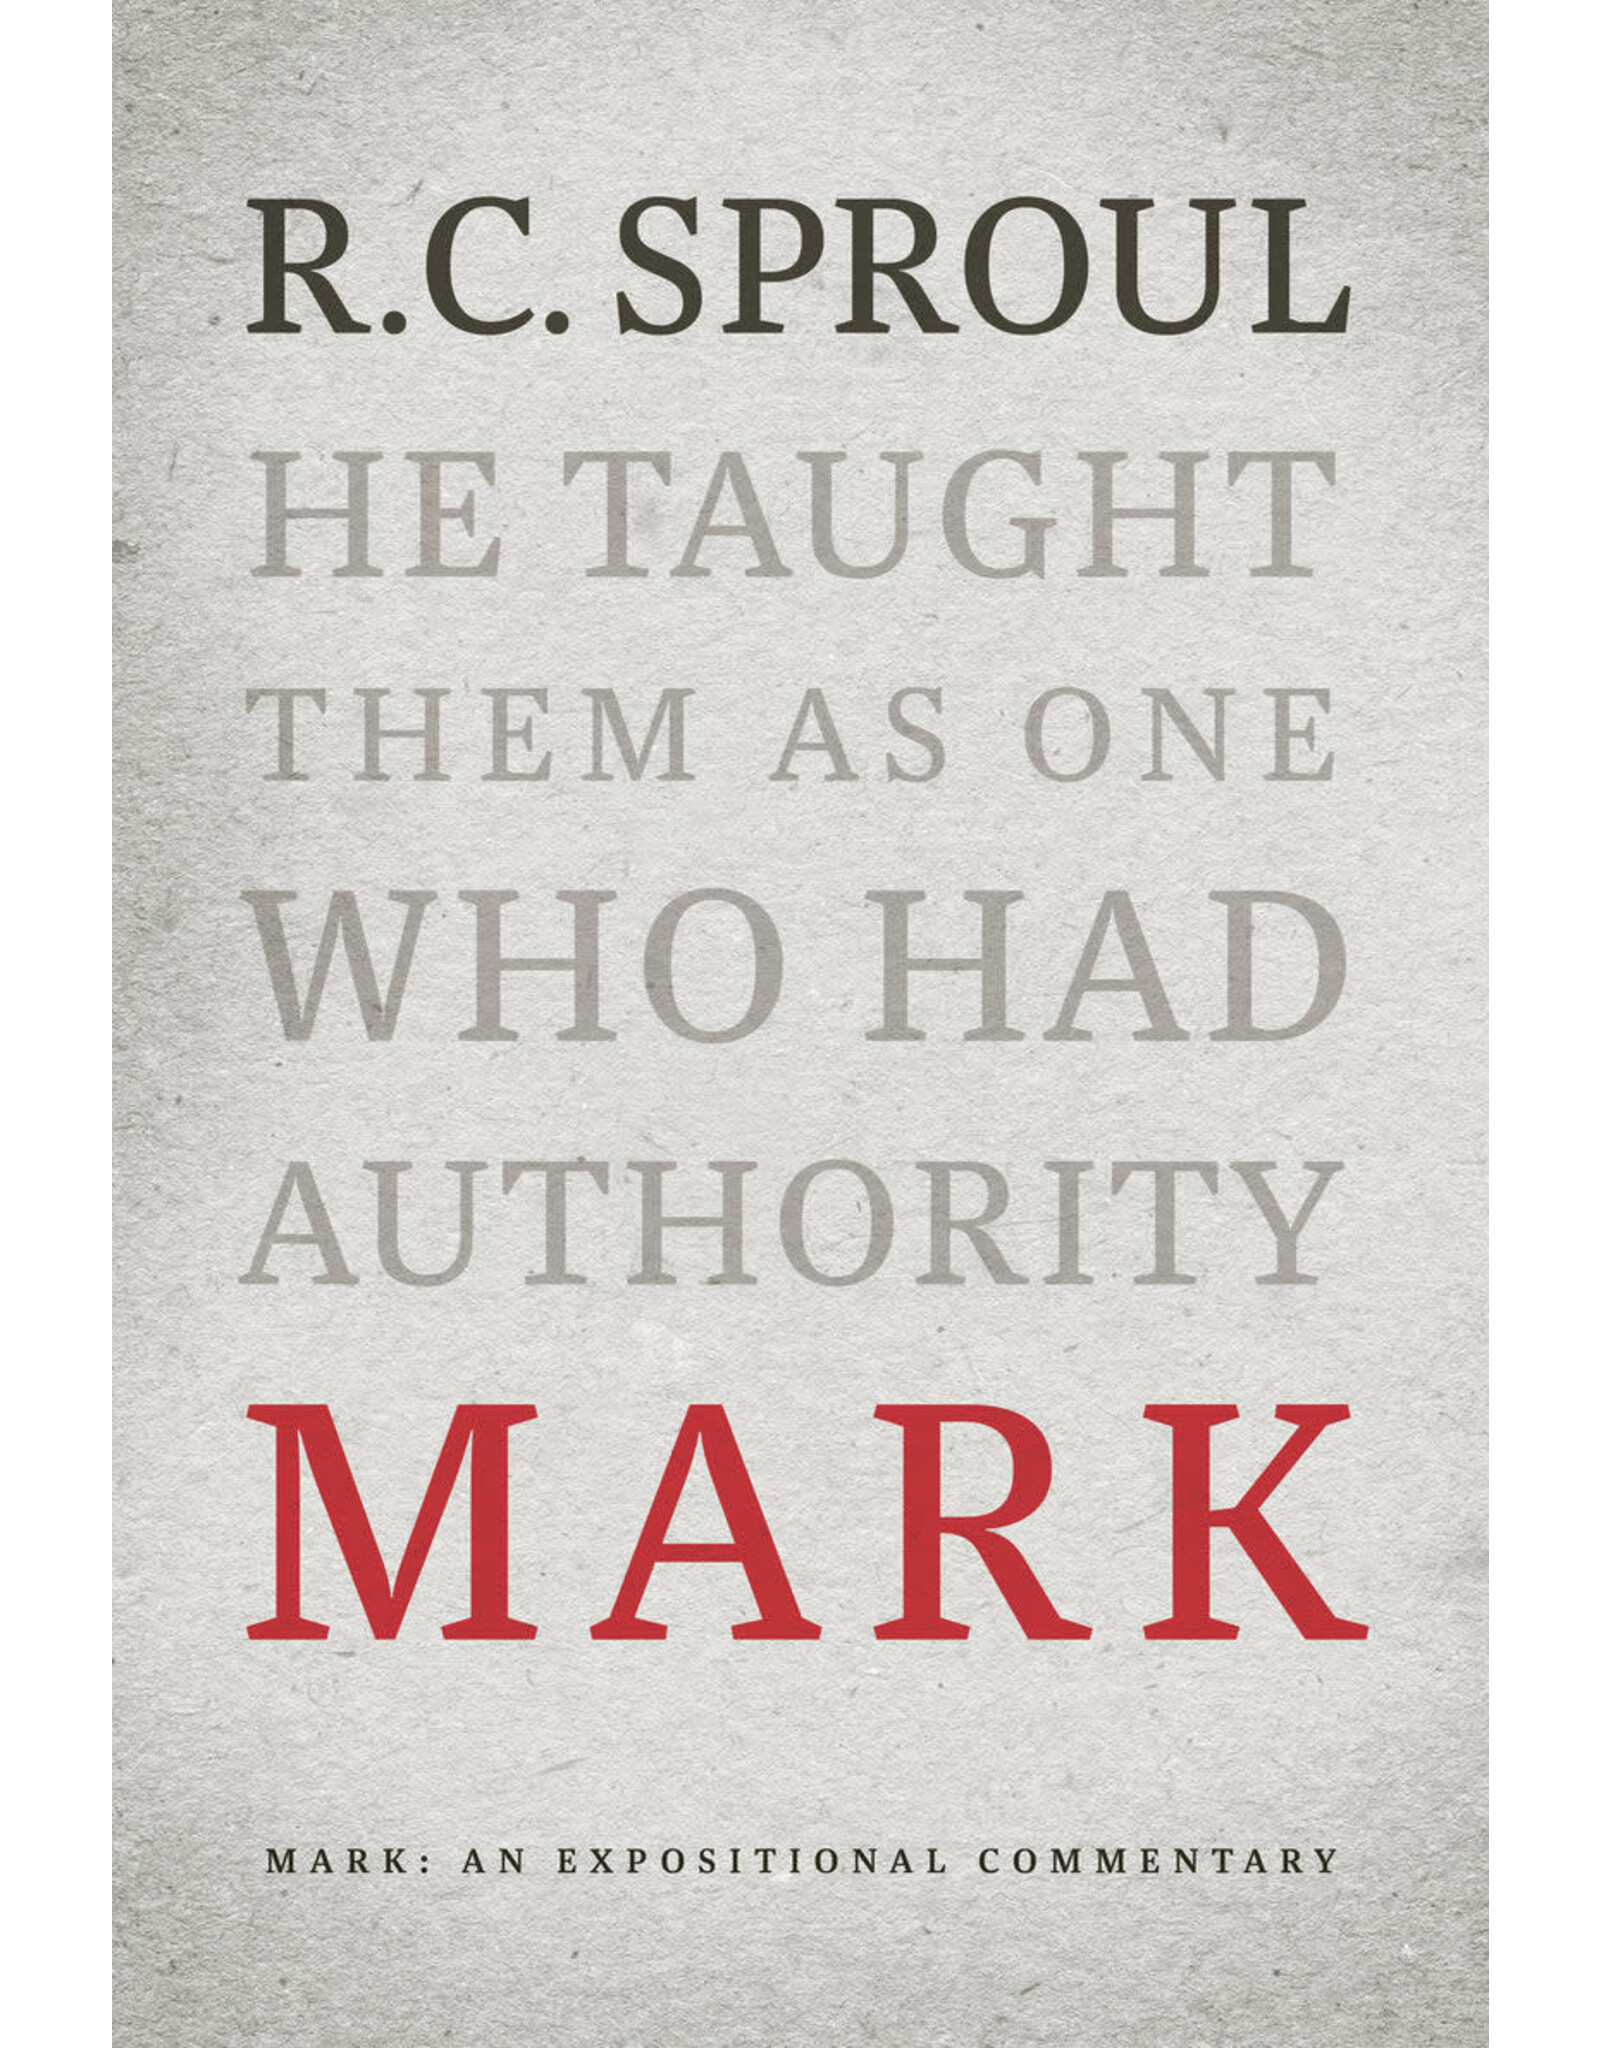 R C Sproul Mark: An Expositional Commentary